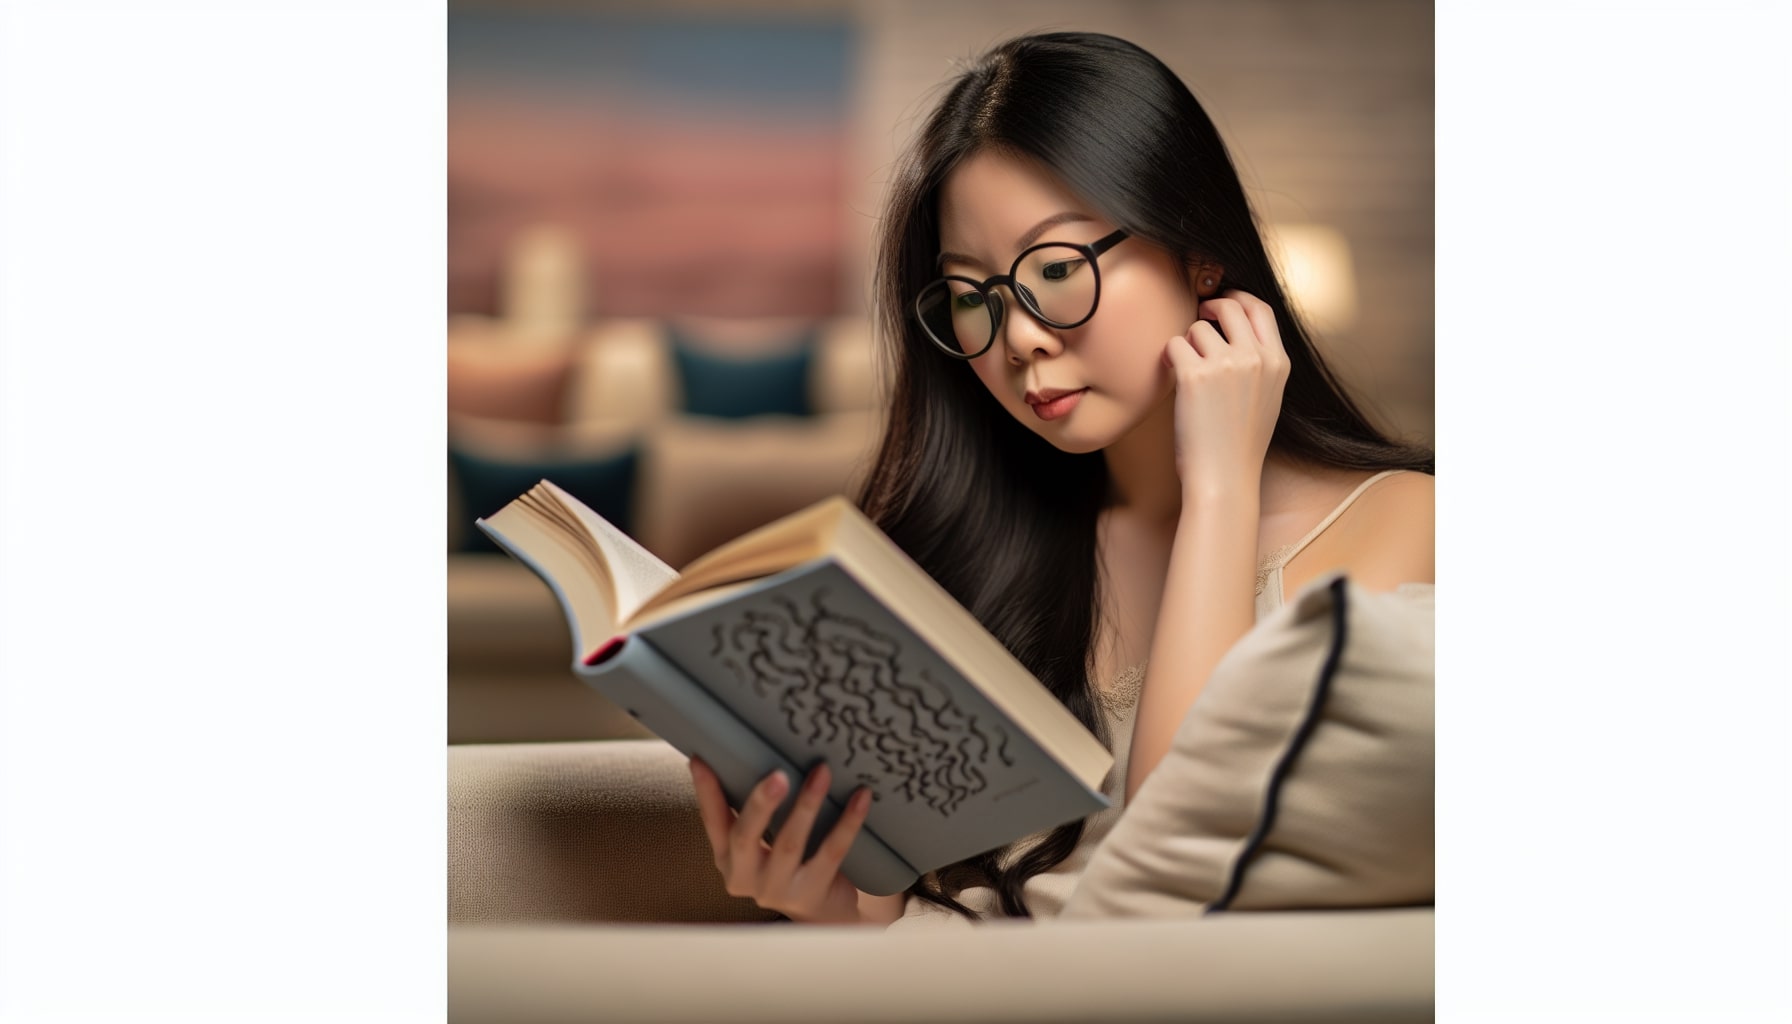 A person avoiding distractions and focusing on reading with blurred background